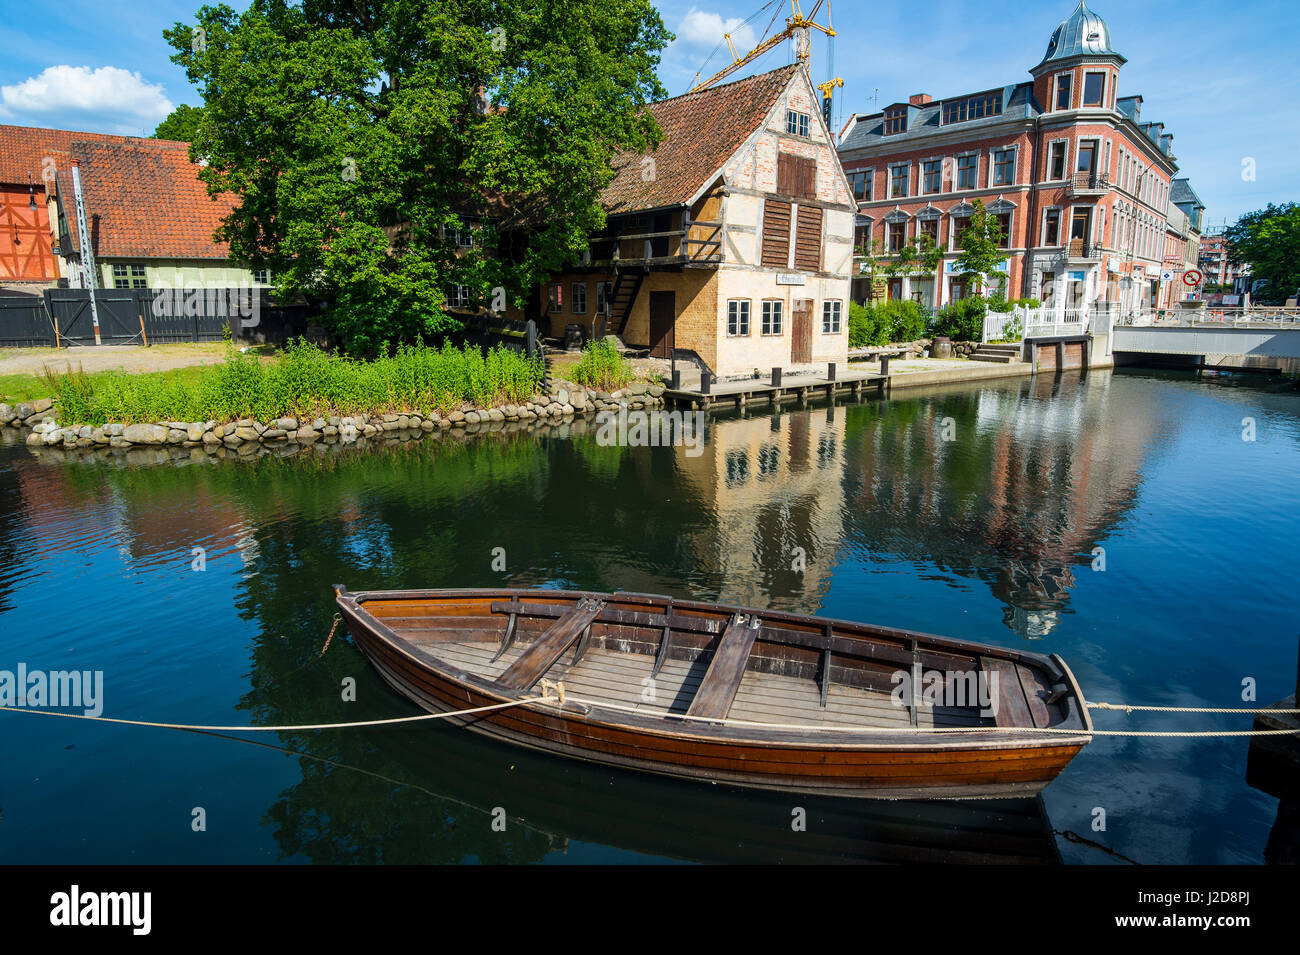 Little pond in the Old Town, Den Gamle By, open air museum in Aarhus, Denmark Stock Photo